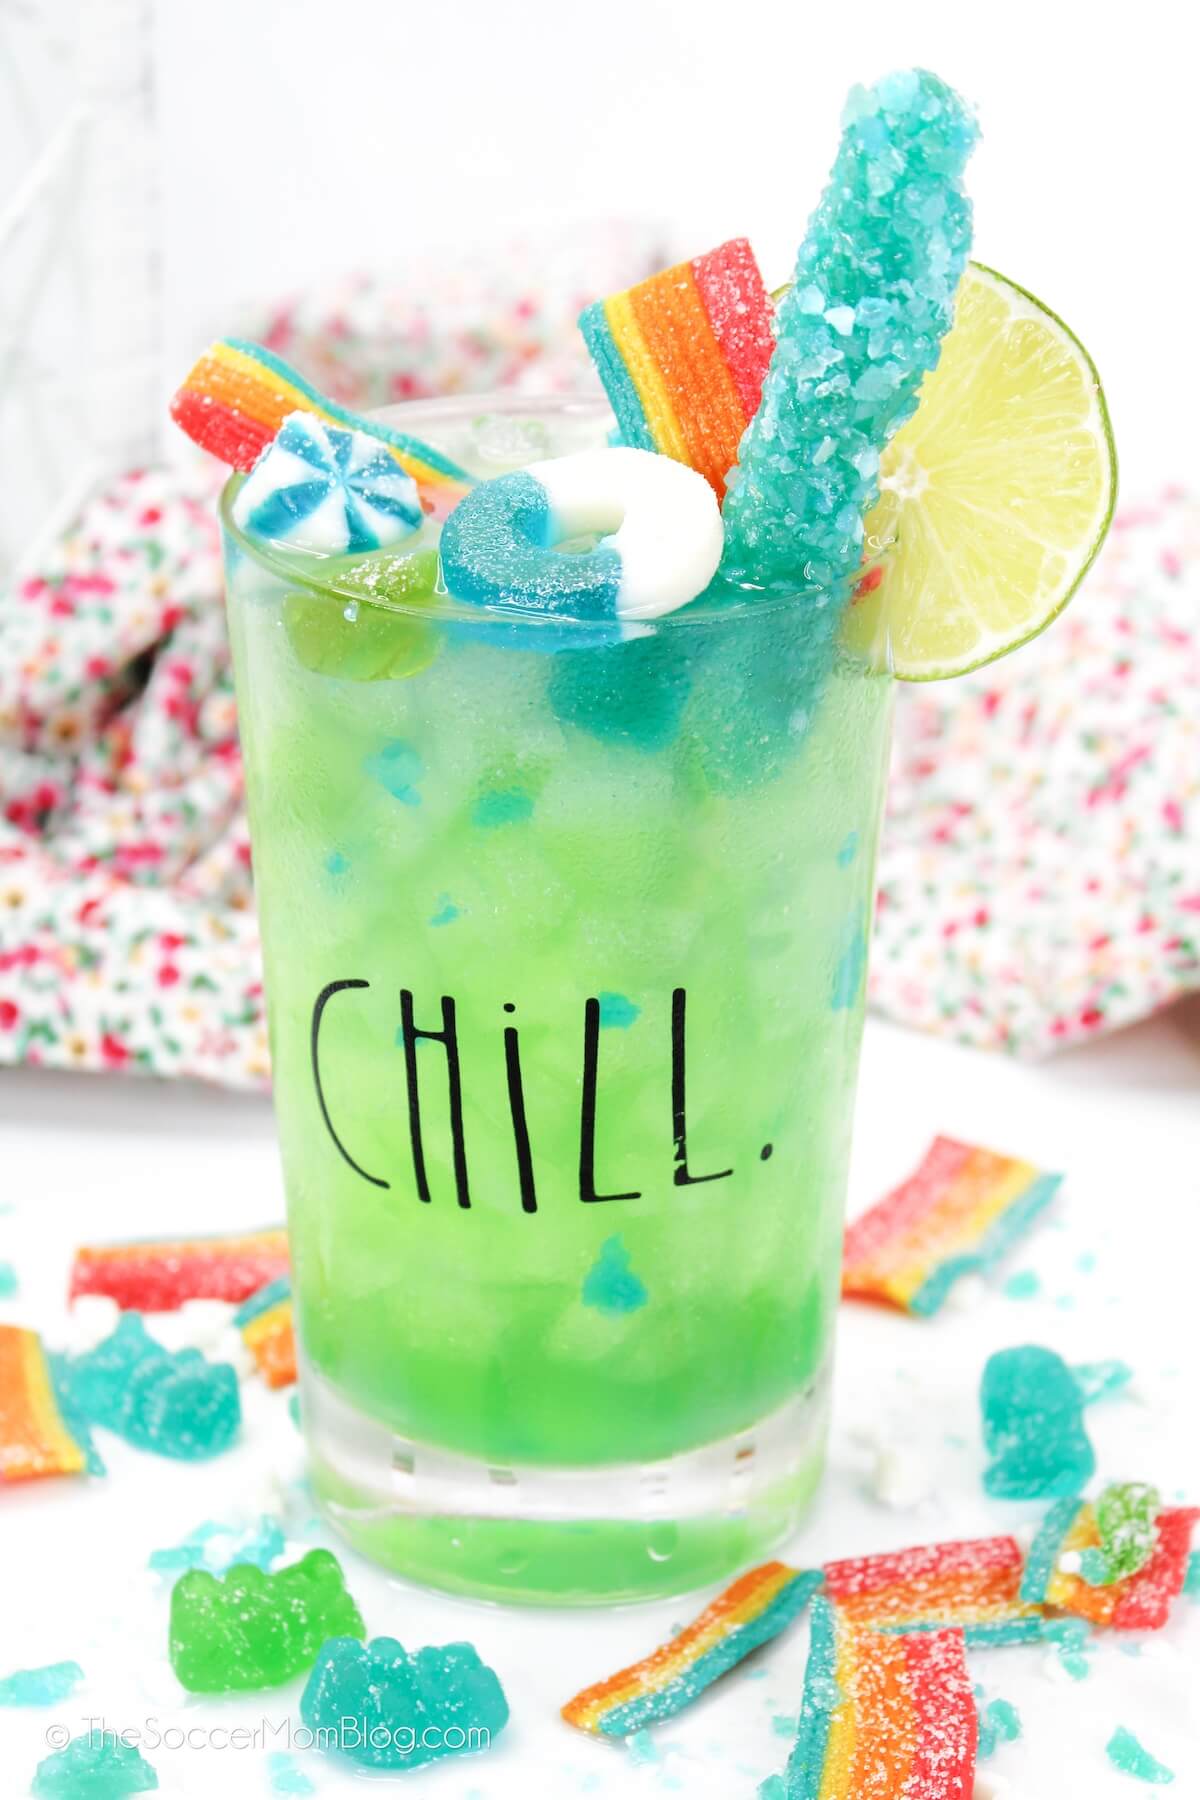 candy shop cocktail: bright green with rock candy on top